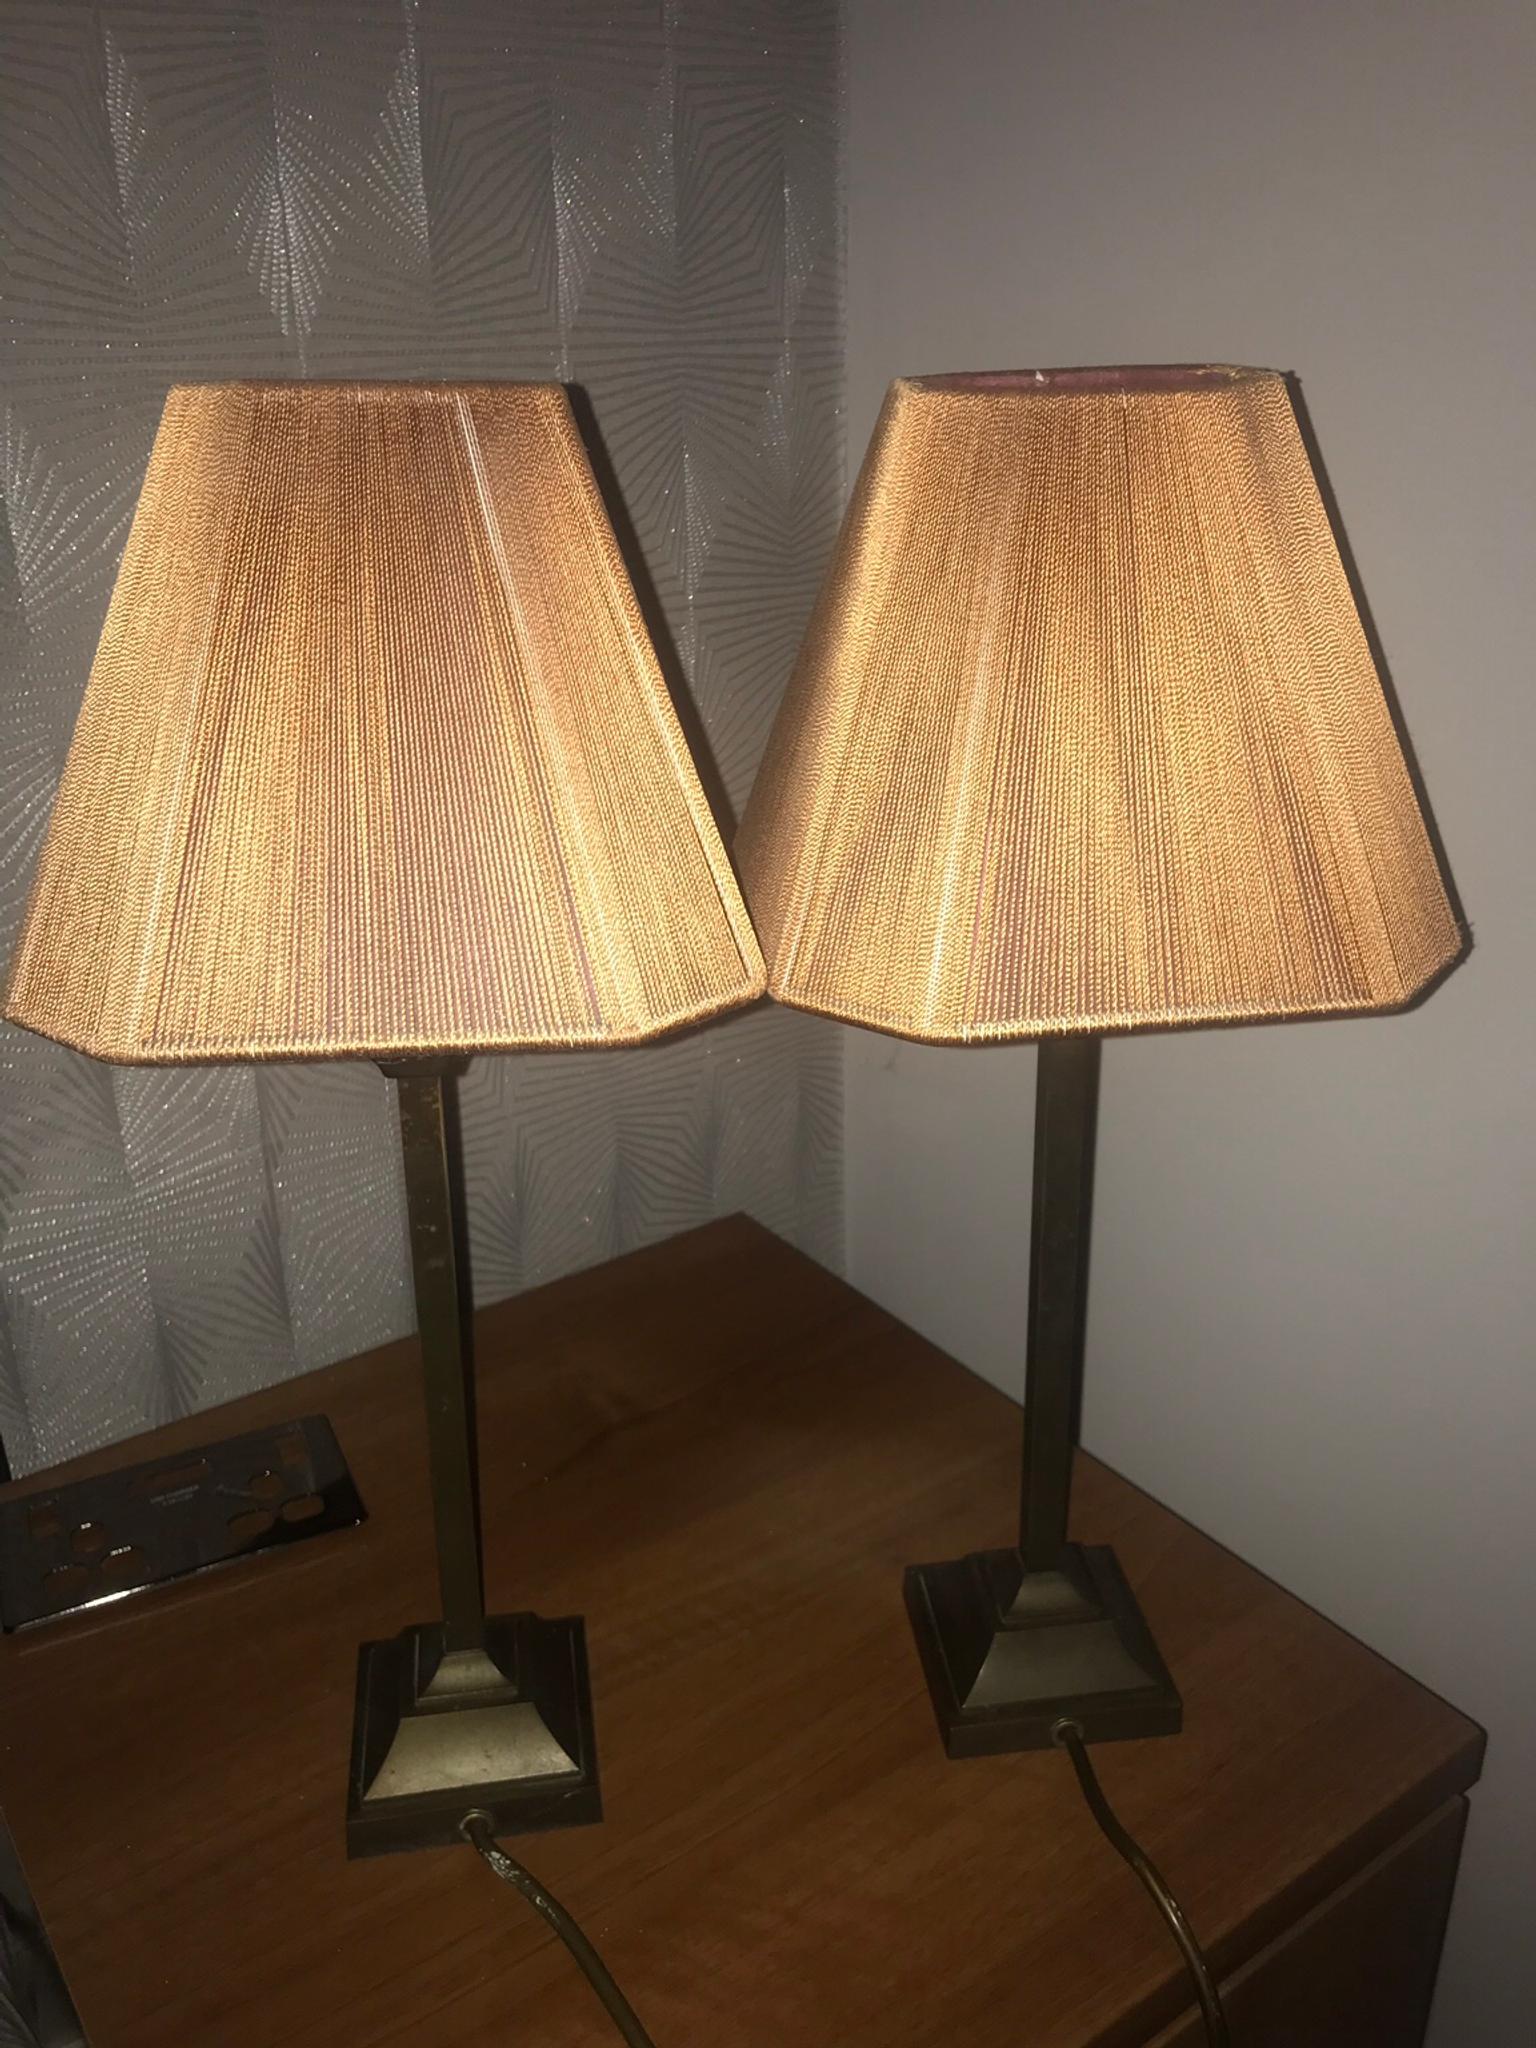 laura ashley table lamps